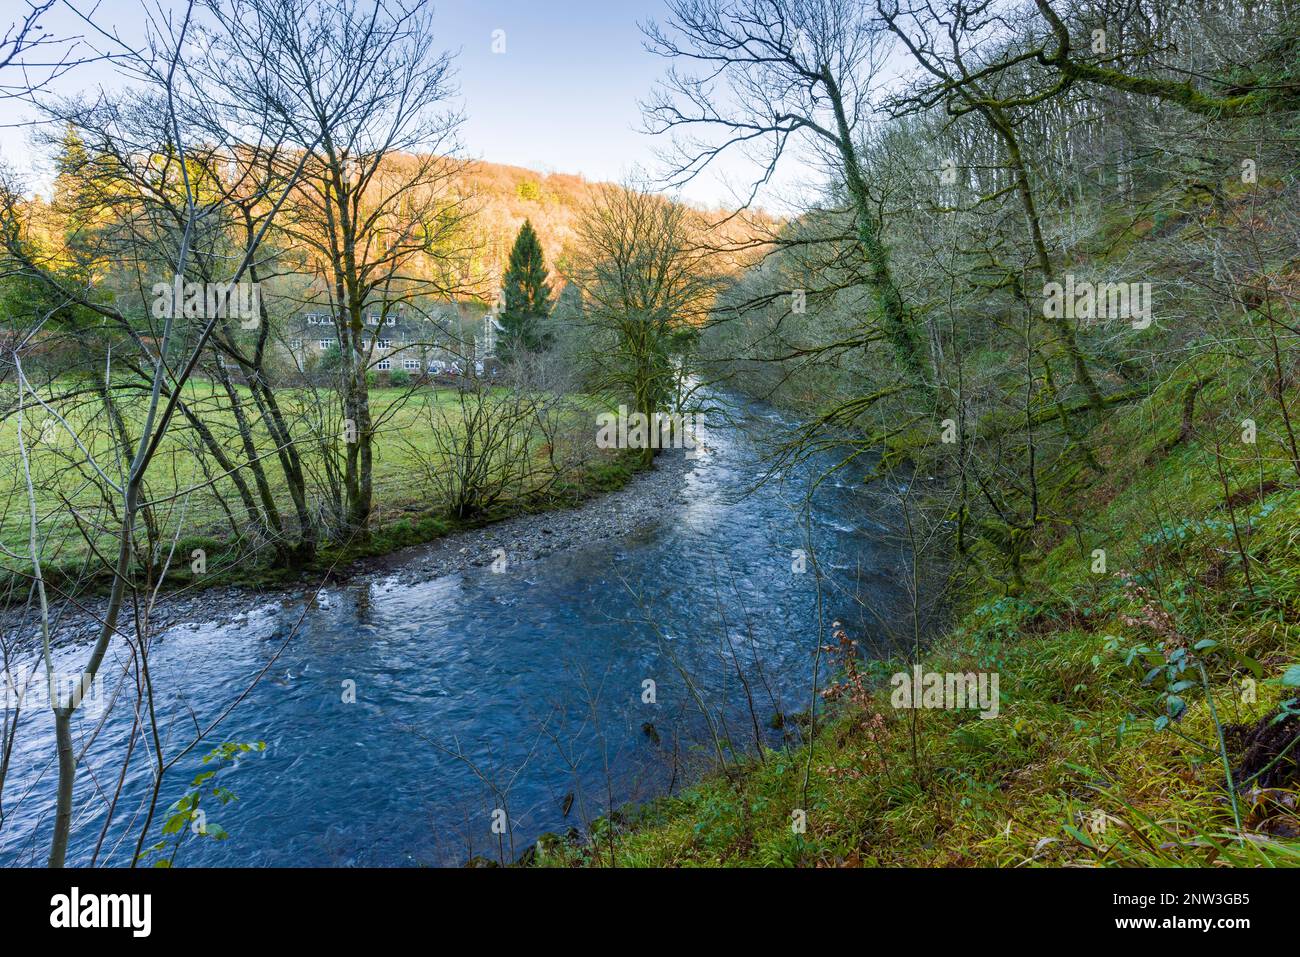 The River Barle from Burridge Woods near Dulverton in the Exmoor National Park, Somerset, England. Stock Photo